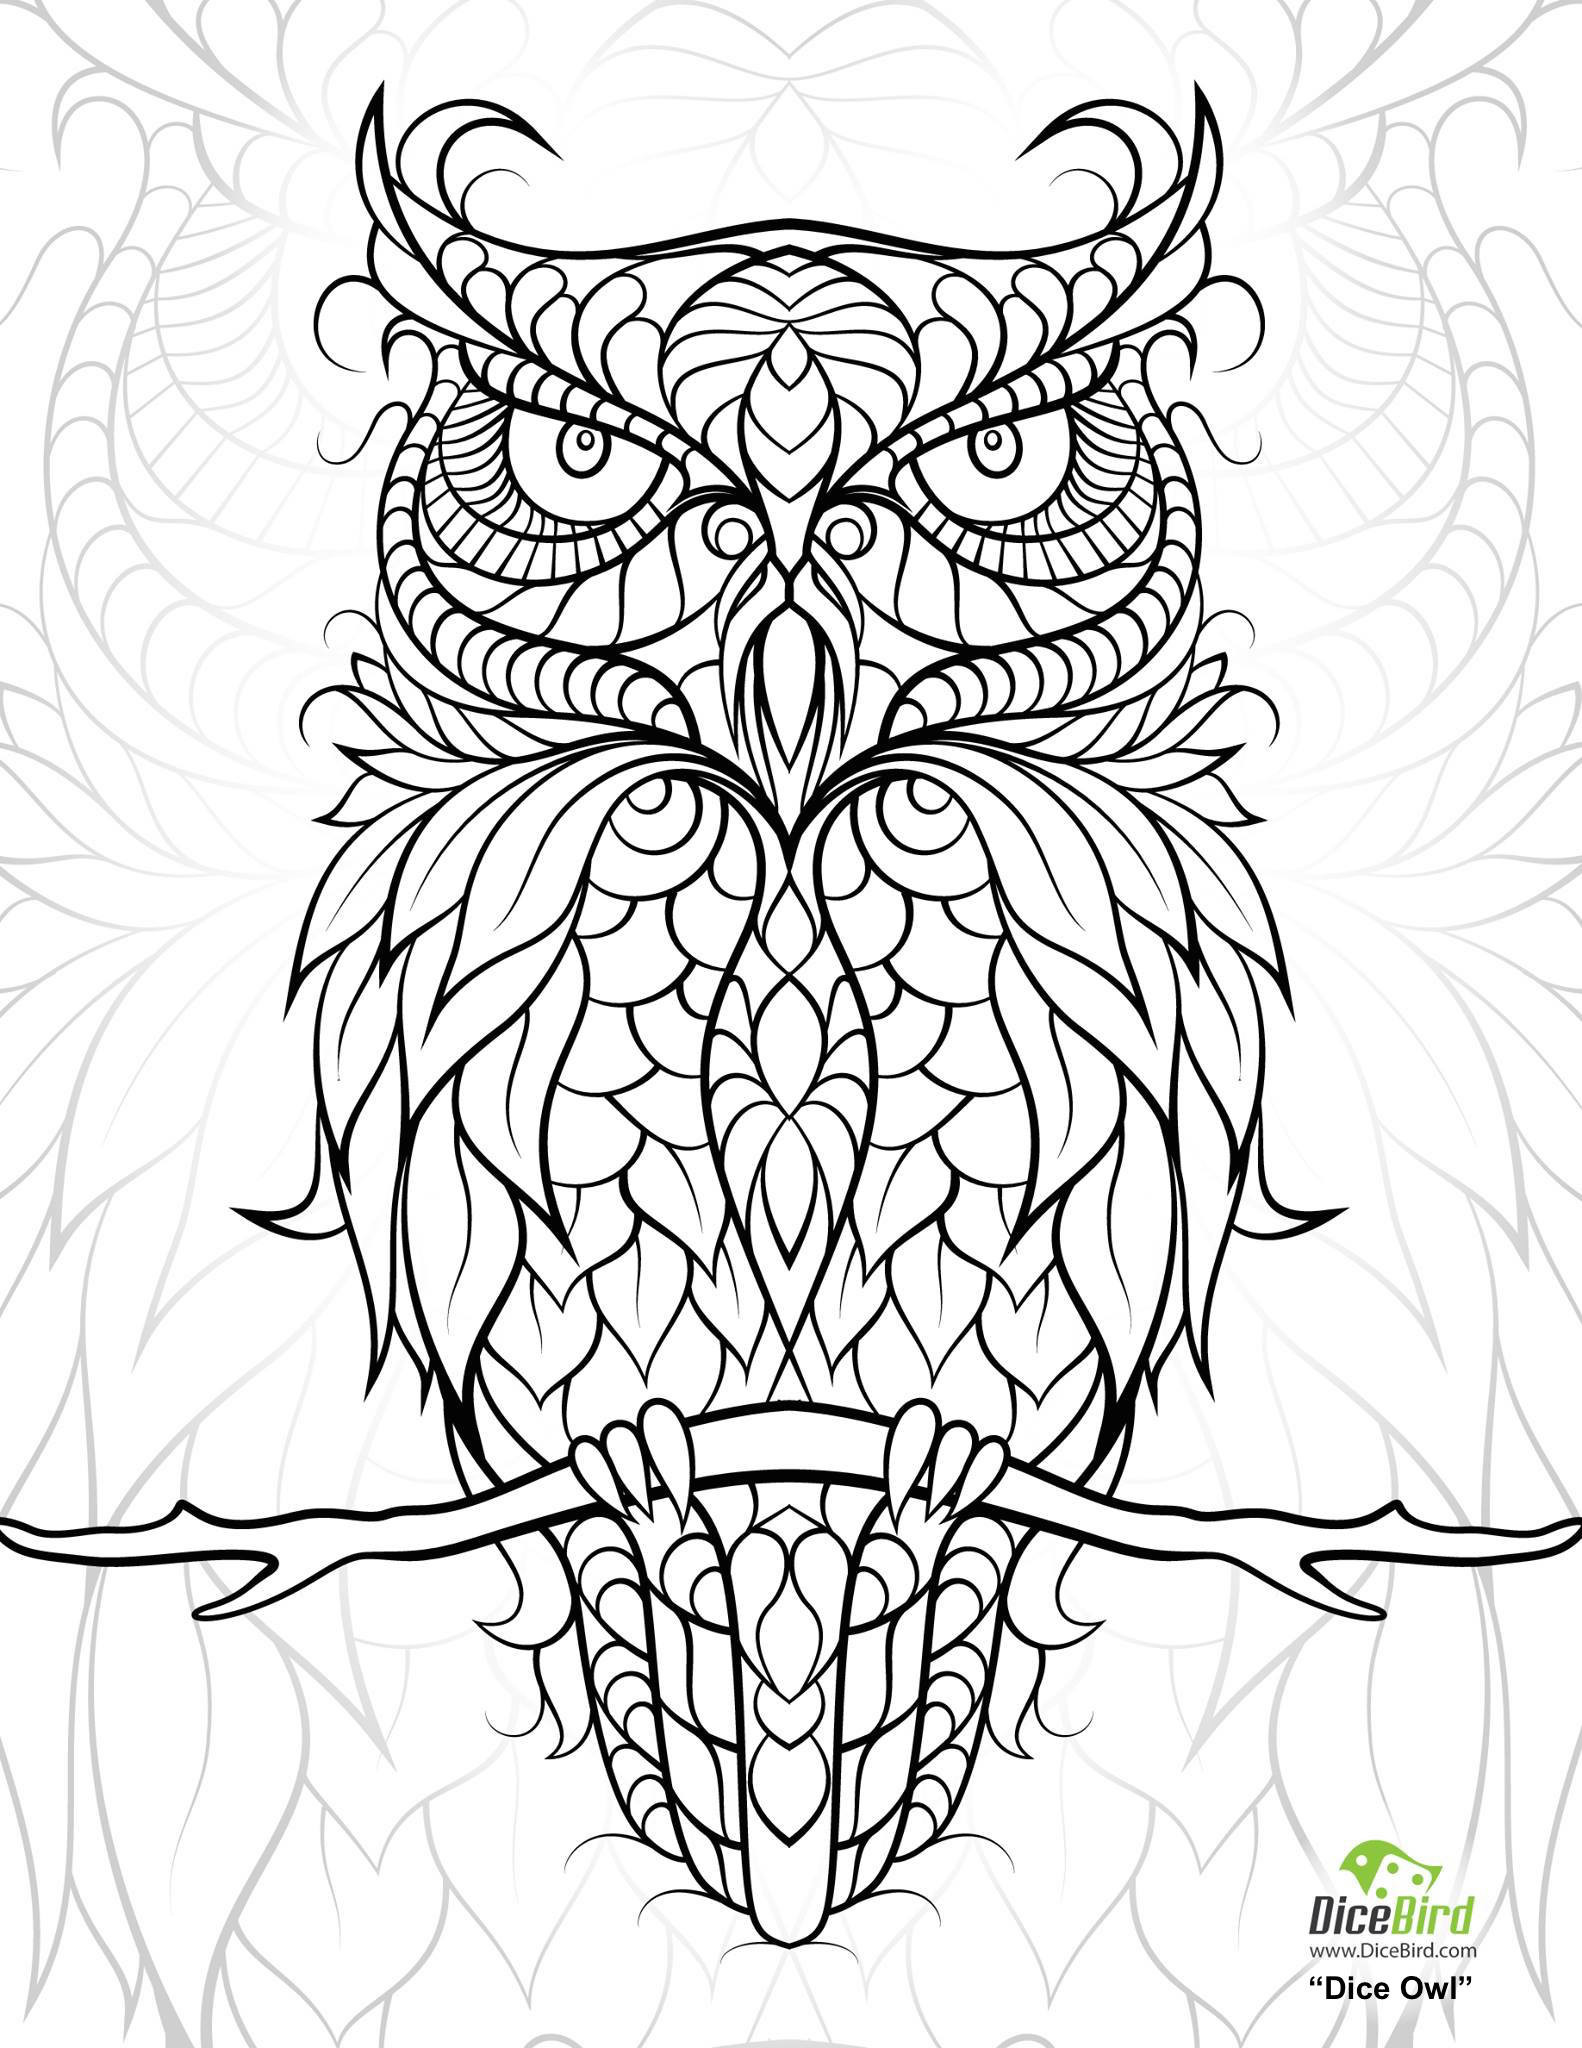 Coloring Books For Adults
 diceowl – Adult Coloring Worldwide